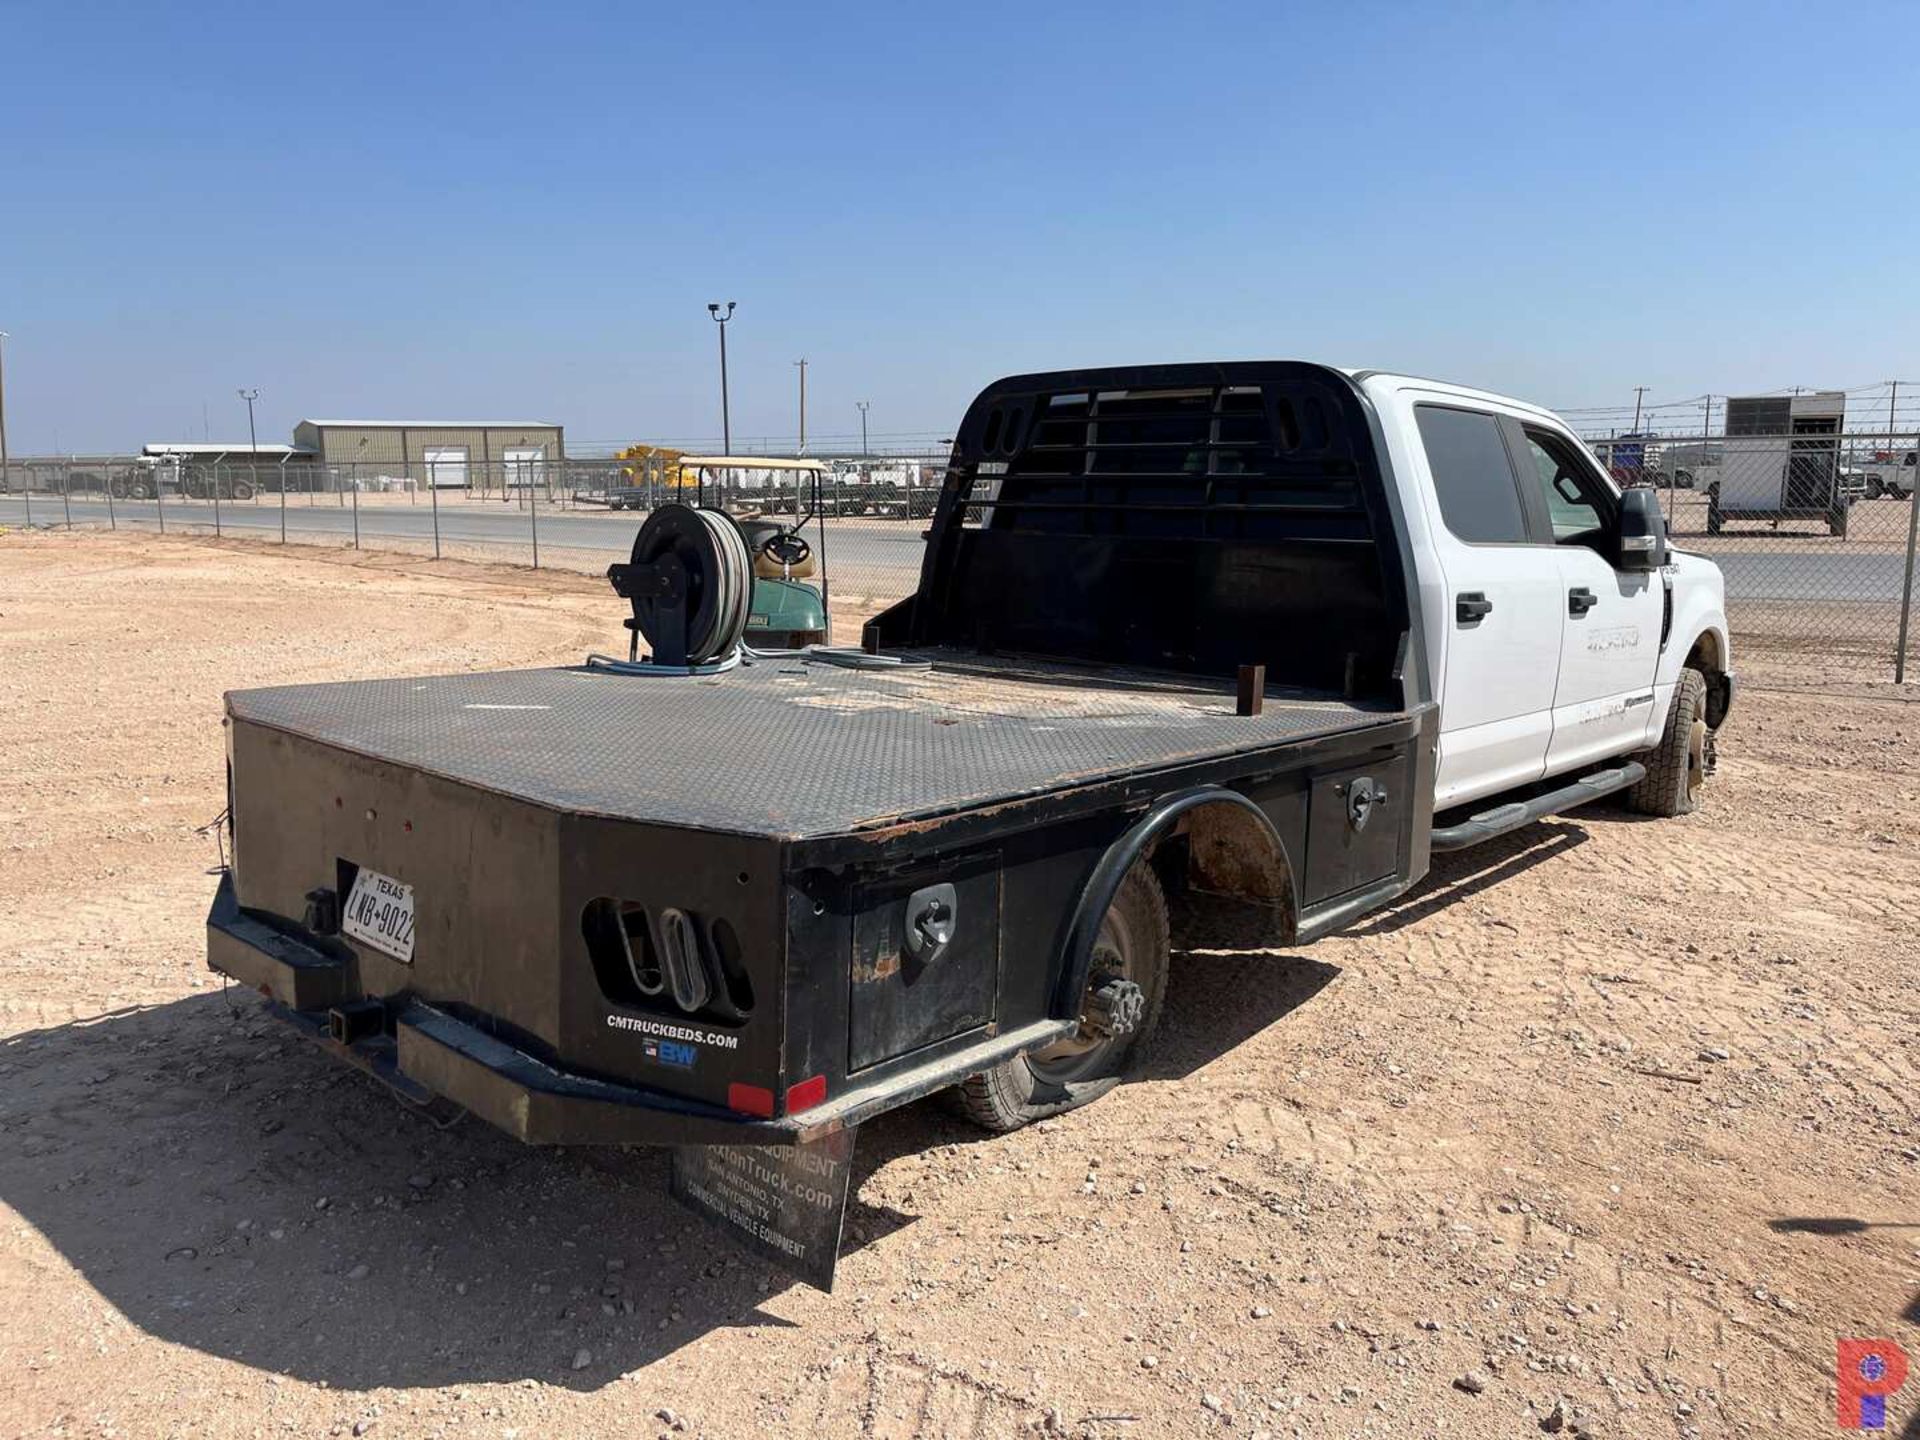 2018 FORD F-350 CREW CAB FLATBED TRUCK - Image 3 of 7